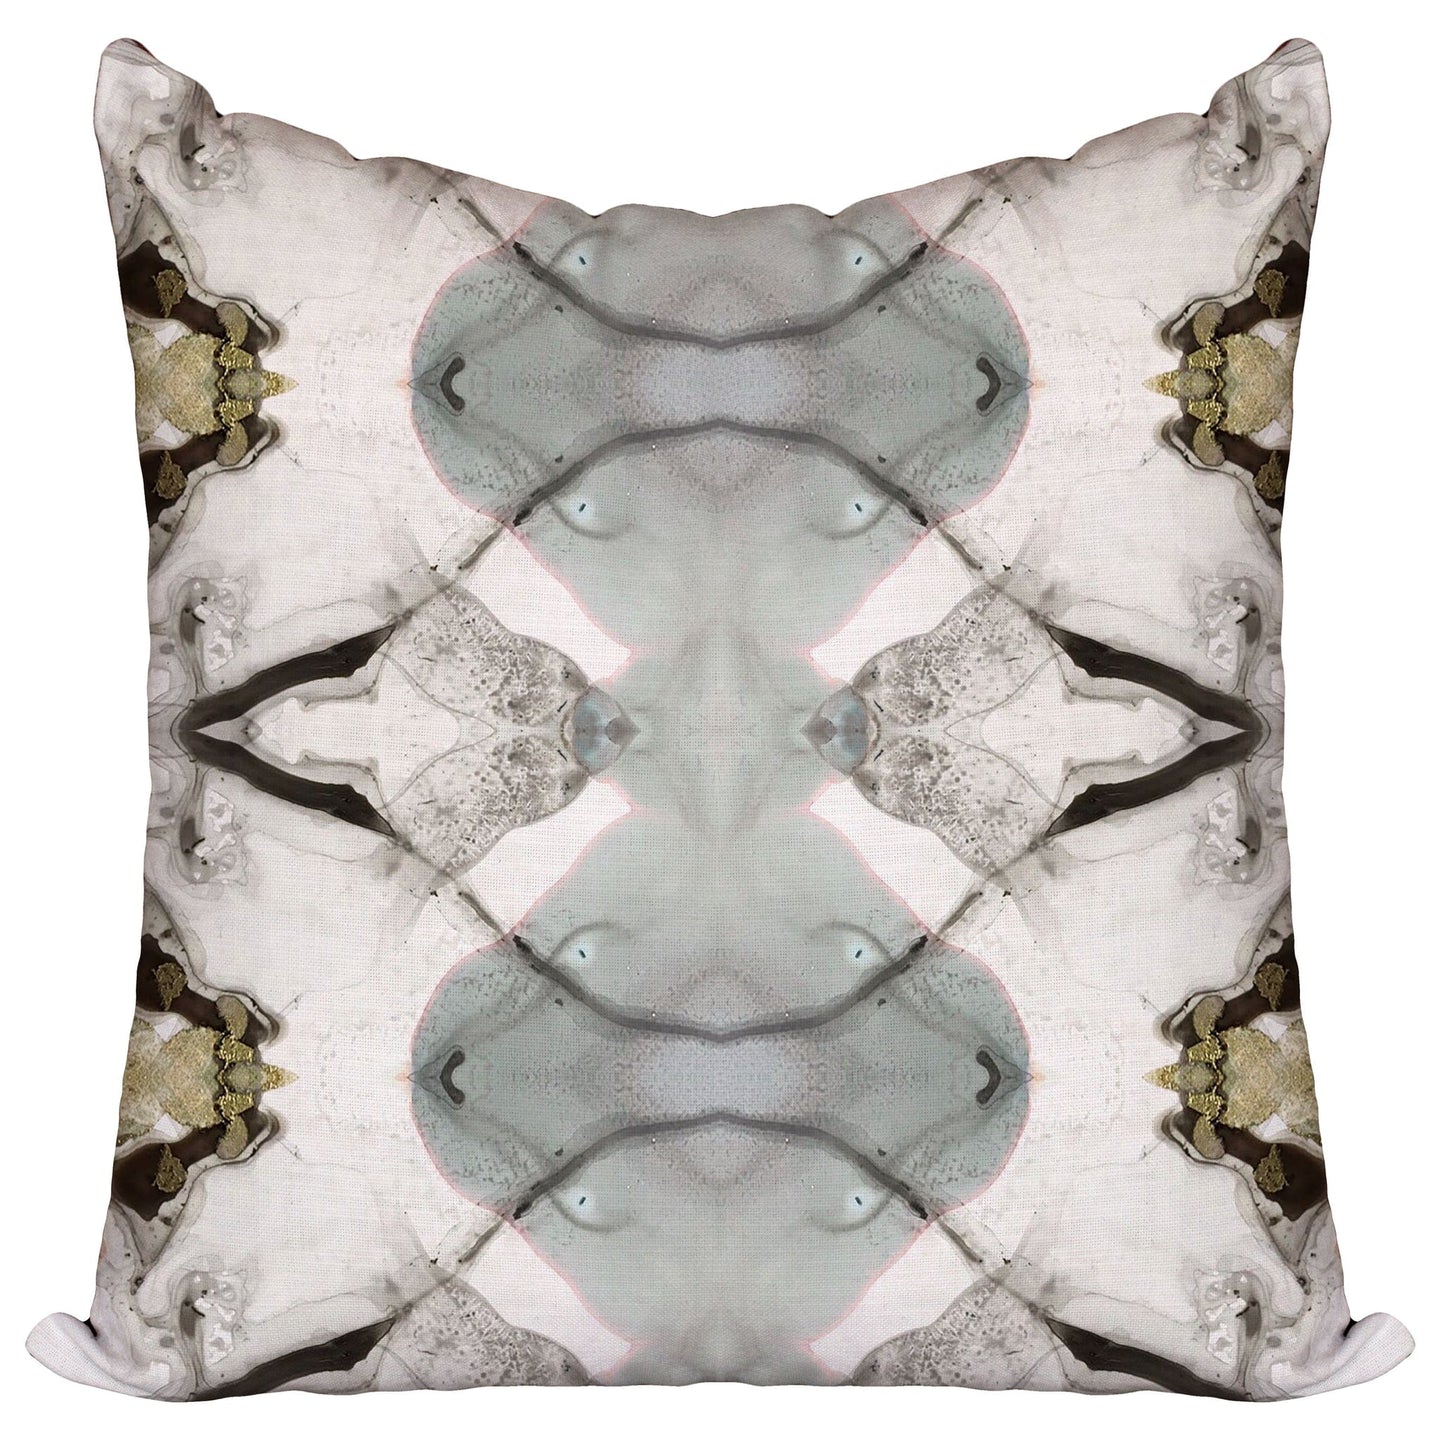 Windy O'Connor Icicles Pillow Pillows